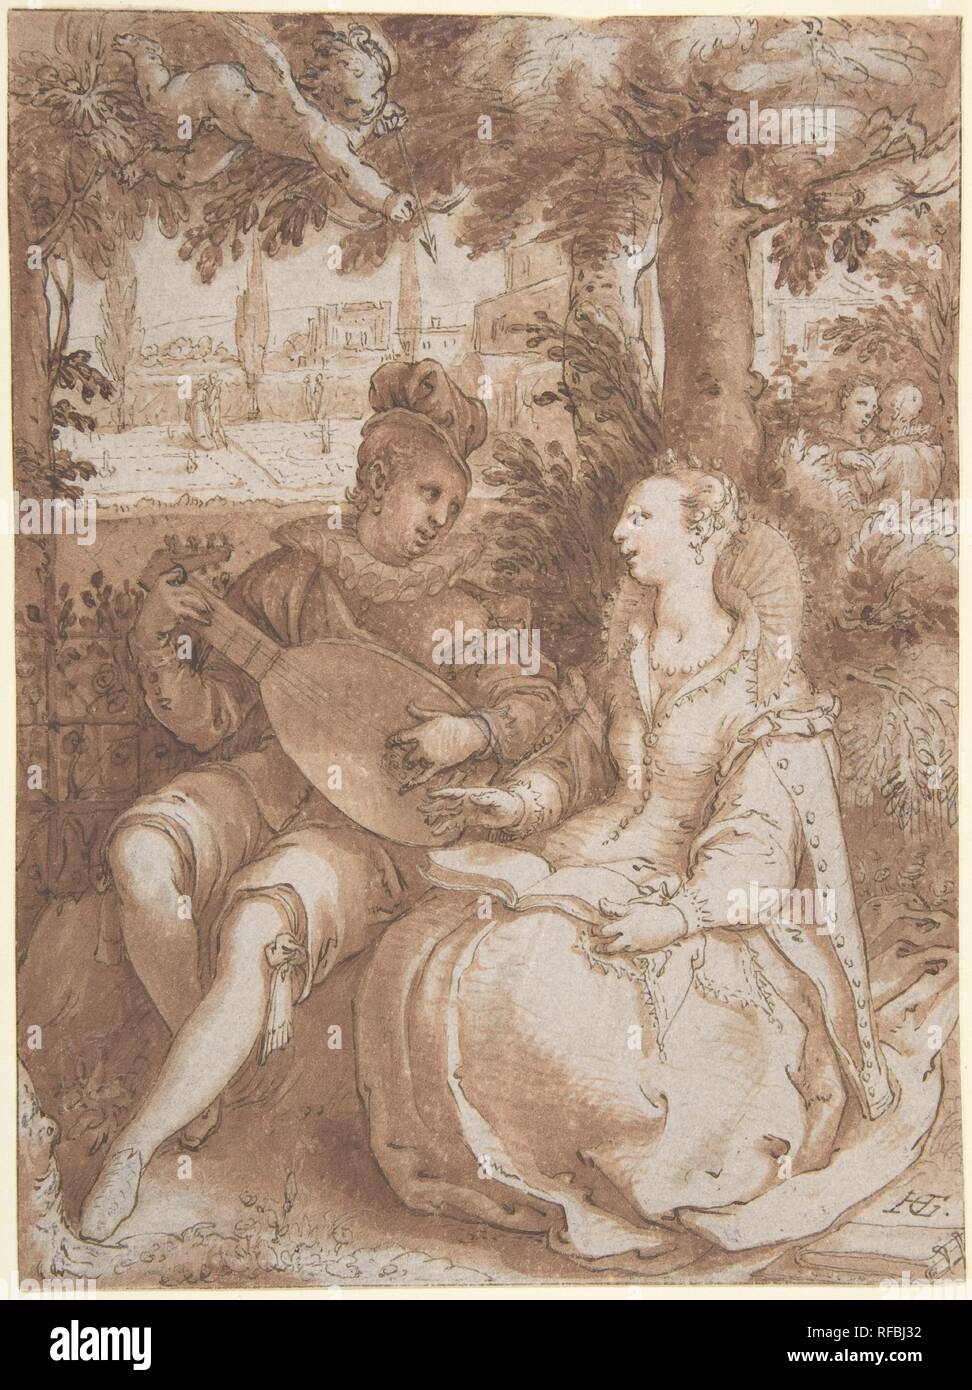 Spring, Drawing for Engraving of the Same Subject. Artist: Hendrick Goltzius (Netherlandish, Mühlbracht 1558-1617 Haarlem). Dimensions: Overall: 7 5/8 x 5 11/16in. (19.4 x 14.5cm). Date: ca. 1594. Museum: Metropolitan Museum of Art, New York, USA. Stock Photo